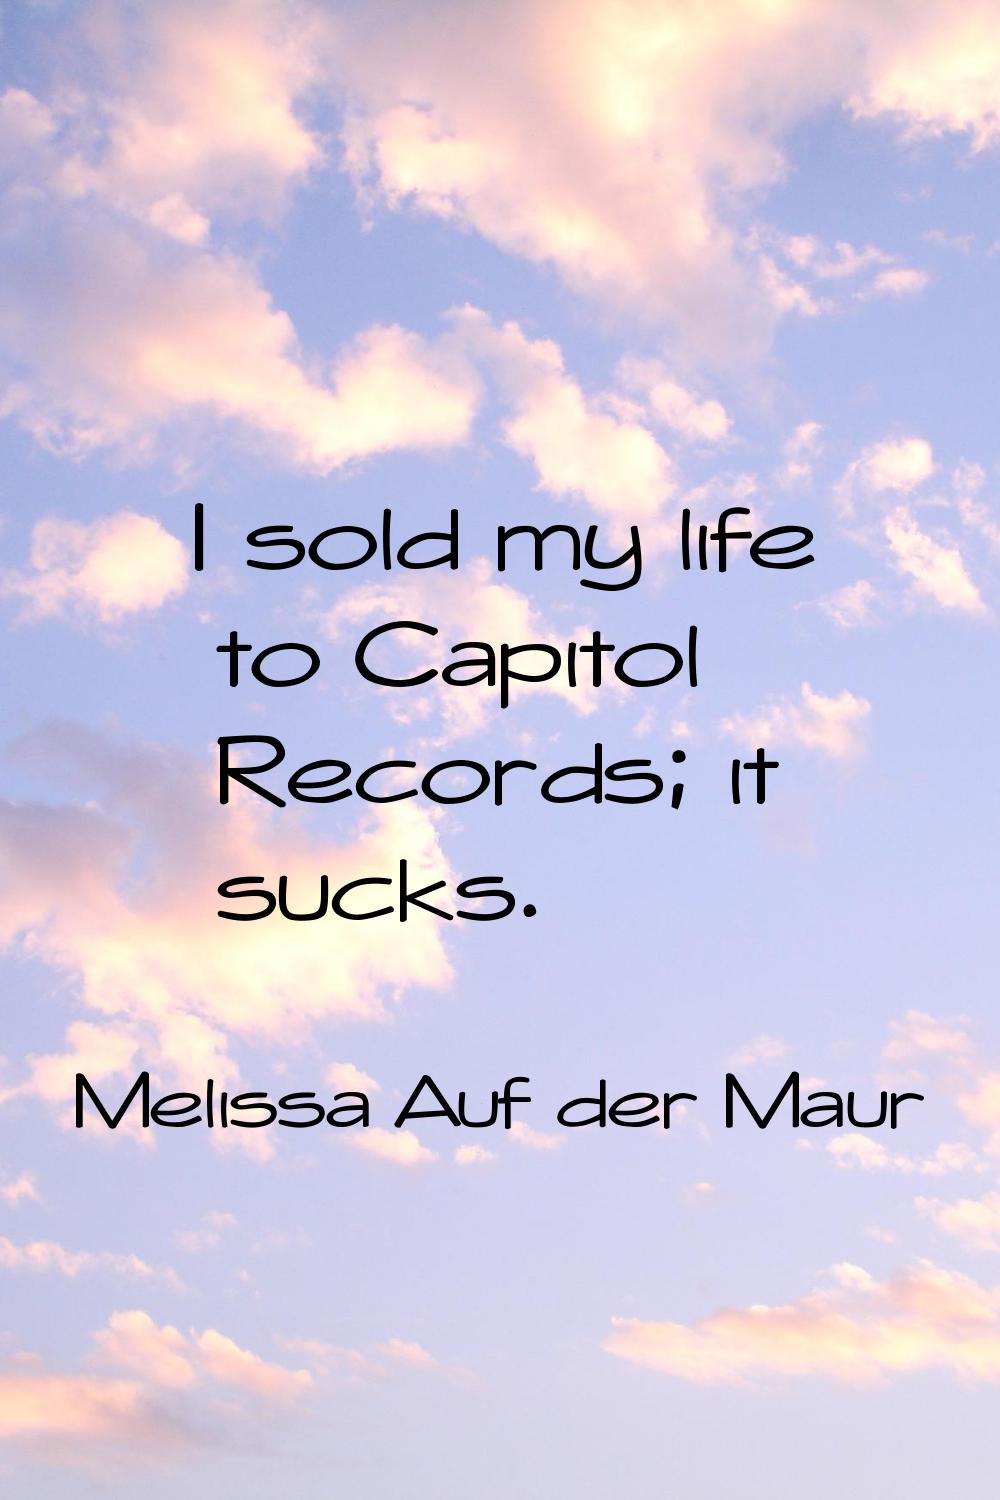 I sold my life to Capitol Records; it sucks.